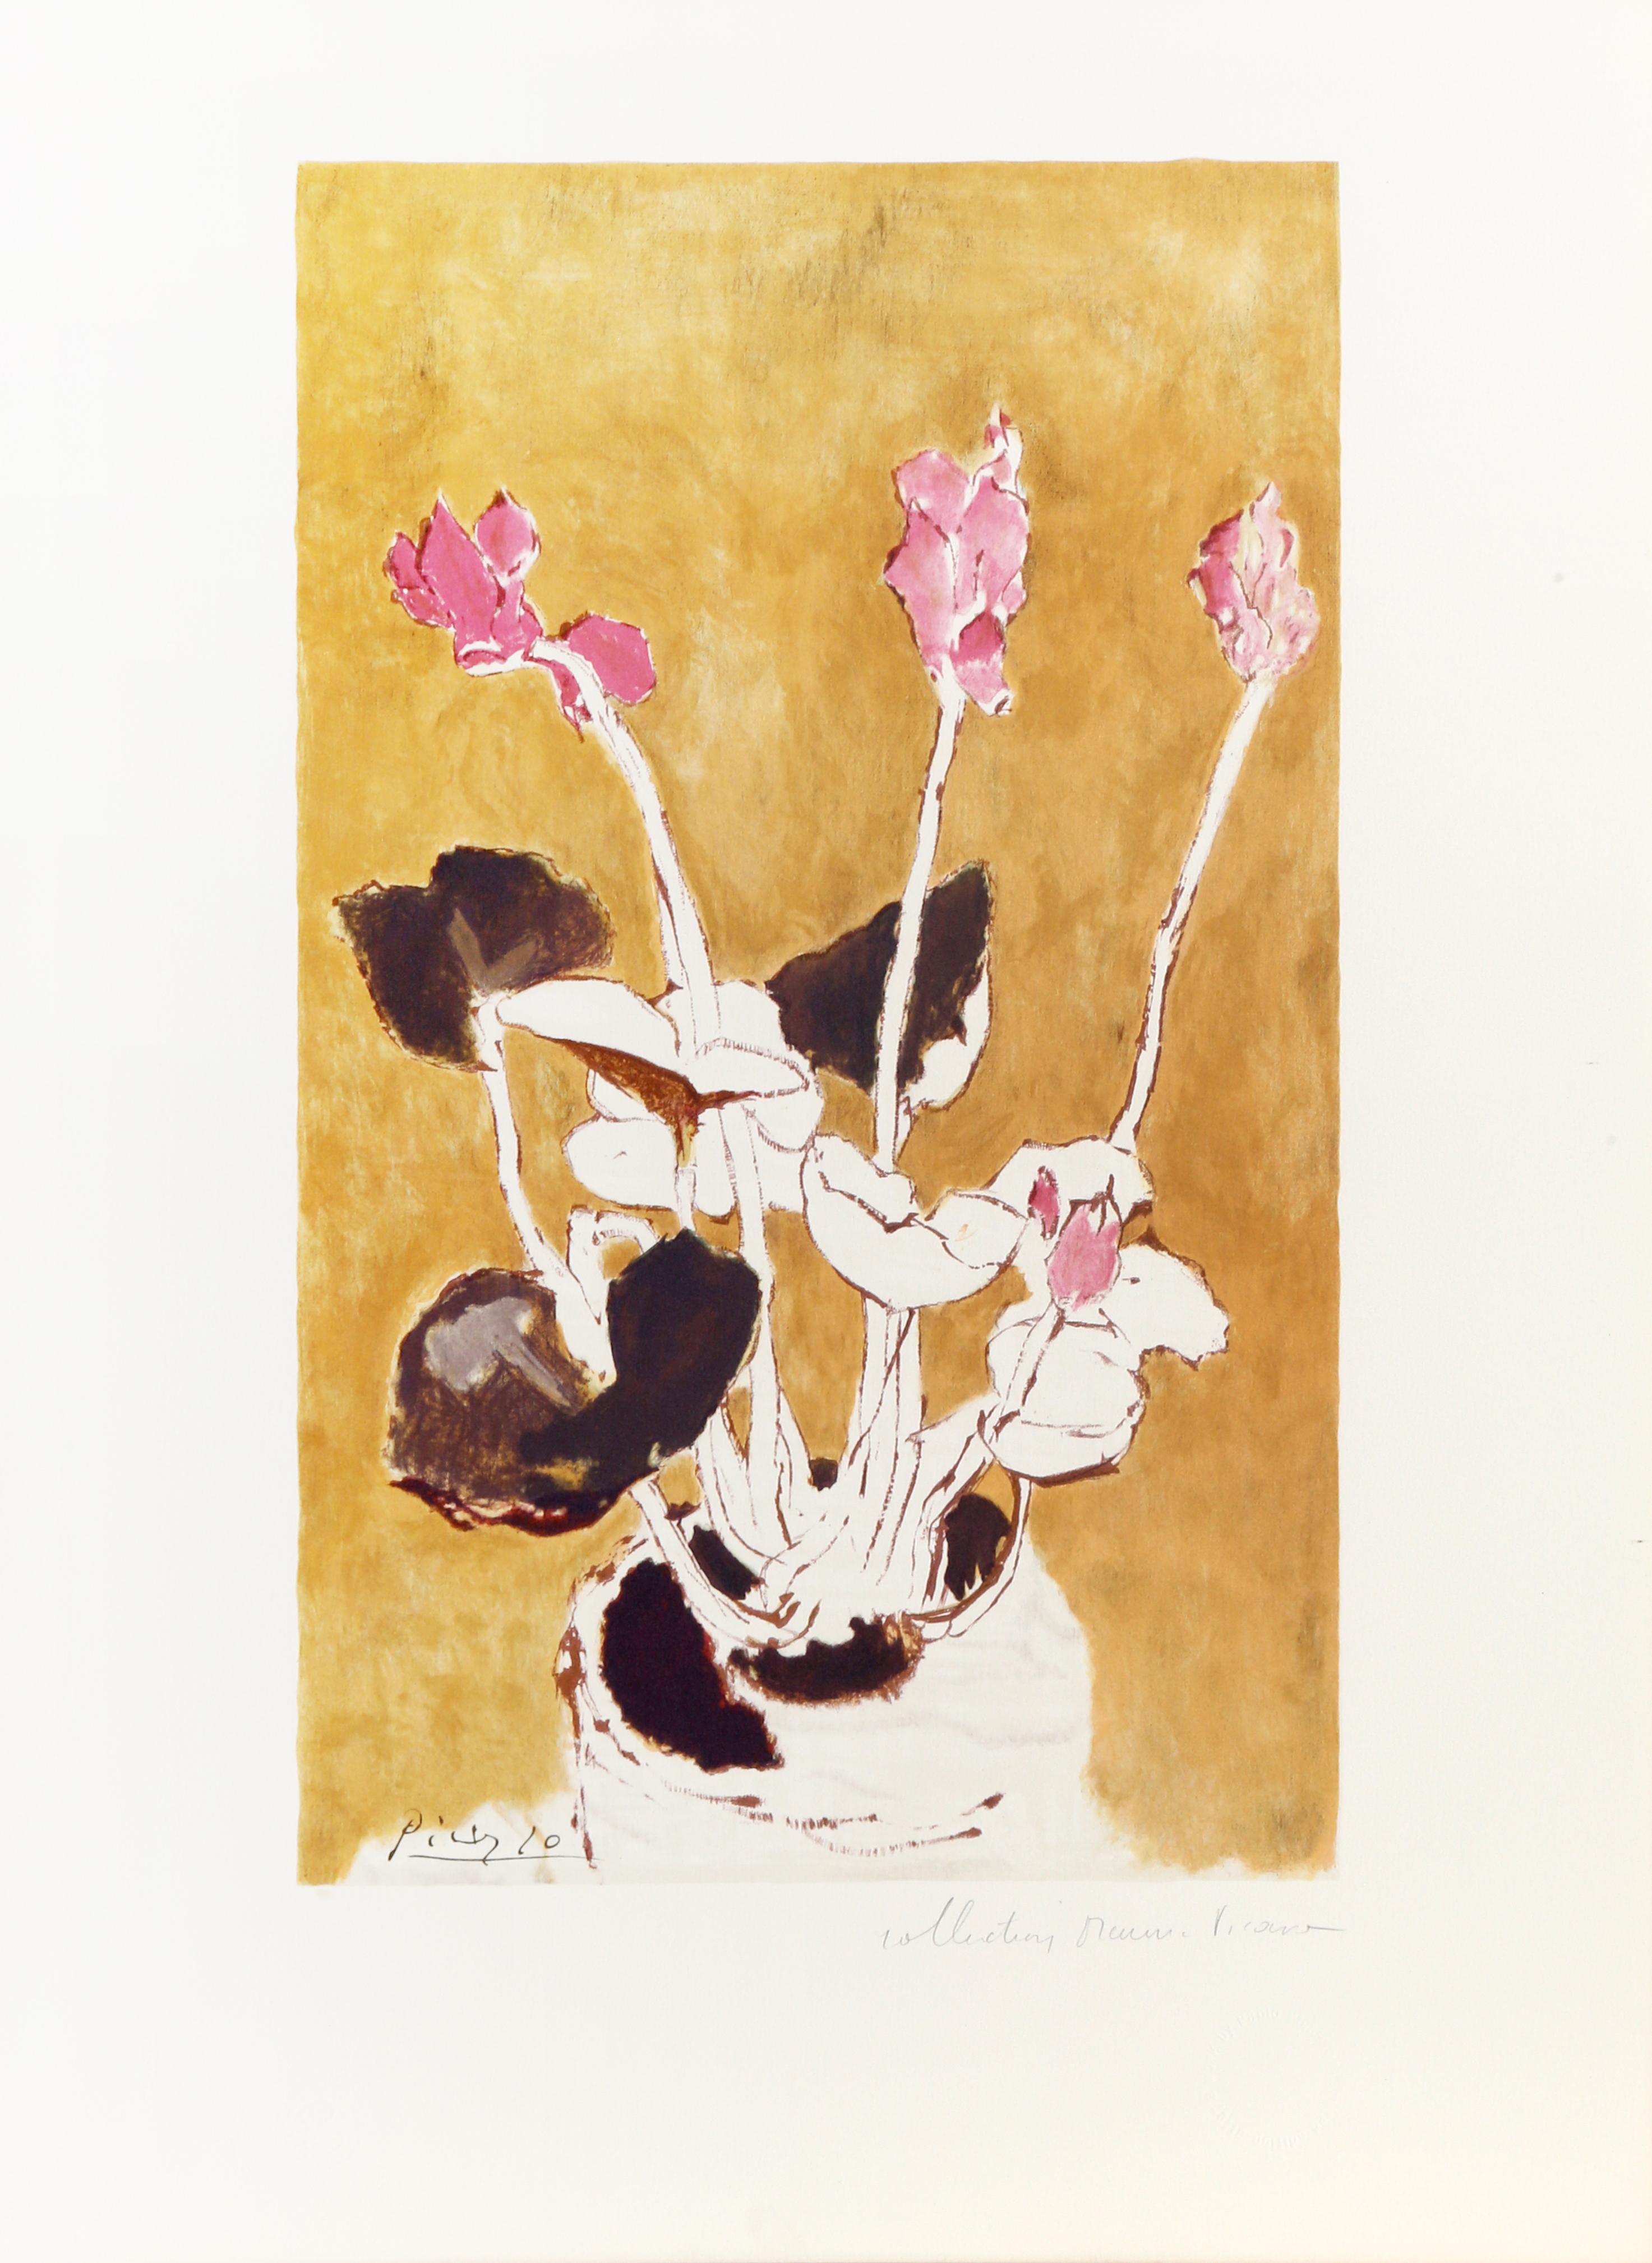 Resting on a surface against a golden yellow background, the pot of cyclamens is rendered with loose, flowing lines and minimal color. A lithograph from the Marina Picasso Estate Collection after the Pablo Picasso painting "Les Cyclamens". The